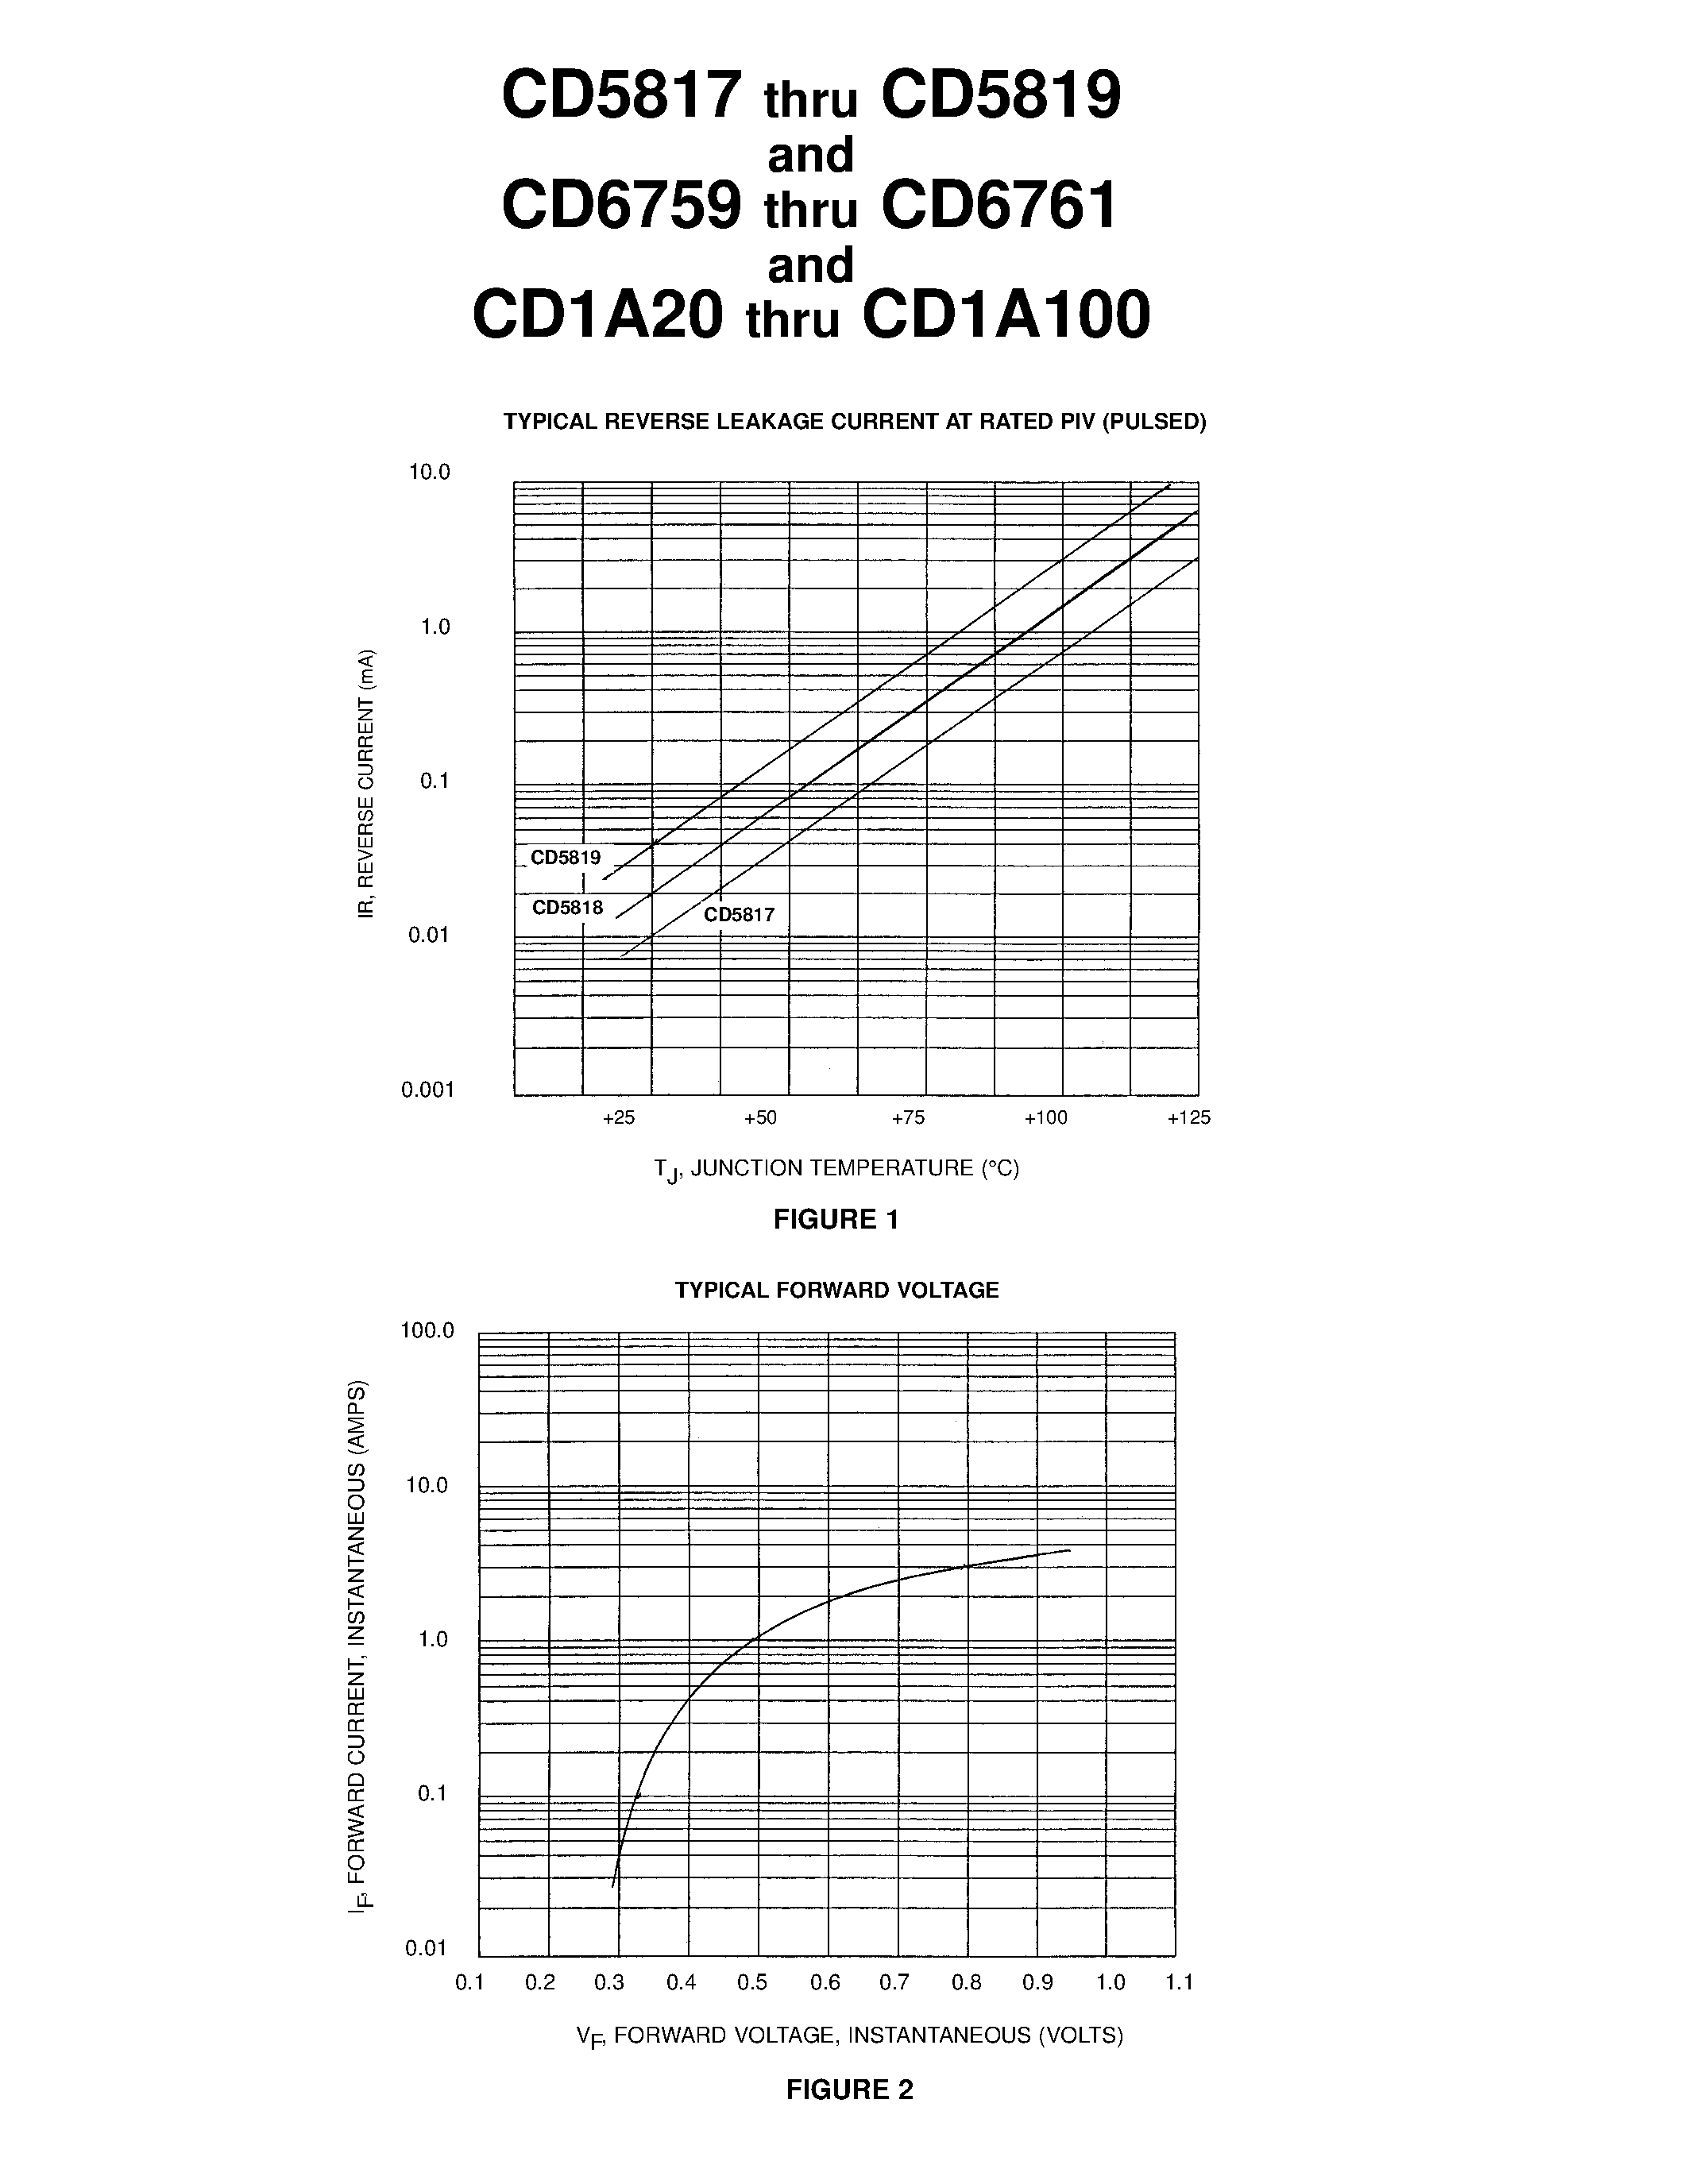 Datasheet CD1A30 - 1 AMP SCHOTTKY BARRIER RECTIFIER CHIPS page 2